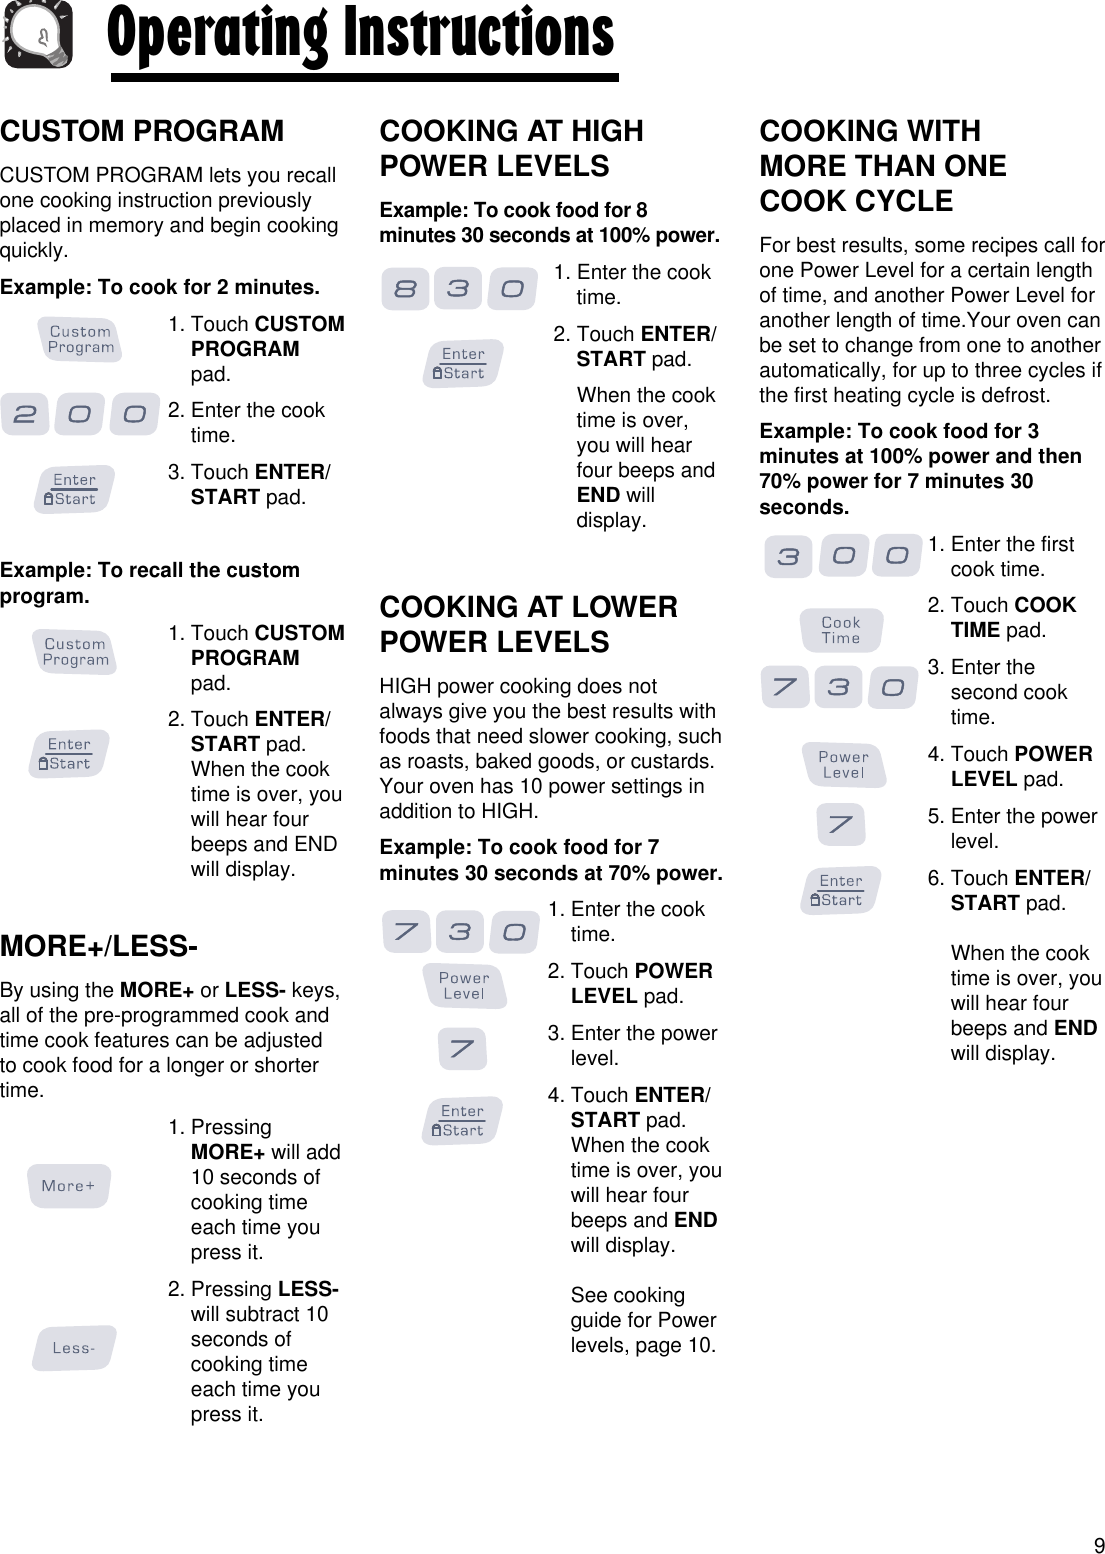 CUSTOM PROGRAMCUSTOM PROGRAM lets you recallone cooking instruction previouslyplaced in memory and begin cookingquickly.Example: To cook for 2 minutes.1. Touch CUSTOMPROGRAMpad.2. Enter the cooktime.3. Touch ENTER/START pad.Example: To recall the customprogram.1. Touch CUSTOMPROGRAMpad.2. Touch ENTER/START pad.When the cooktime is over, youwill hear fourbeeps and ENDwill display. MORE+/LESS-By using the MORE+ or LESS- keys,all of the pre-programmed cook andtime cook features can be adjustedto cook food for a longer or shortertime.1. PressingMORE+ will add10 seconds ofcooking timeeach time youpress it.2. Pressing LESS-will subtract 10seconds ofcooking timeeach time youpress it.COOKING AT HIGHPOWER LEVELSExample: To cook food for 8minutes 30 seconds at 100% power.1. Enter the cooktime.2. Touch ENTER/START pad.When the cooktime is over,you will hearfour beeps andEND willdisplay.COOKING AT LOWERPOWER LEVELSHIGH power cooking does notalways give you the best results withfoods that need slower cooking, suchas roasts, baked goods, or custards.Your oven has 10 power settings inaddition to HIGH.Example: To cook food for 7minutes 30 seconds at 70% power.1. Enter the cooktime.2. Touch POWERLEVEL pad.3. Enter the powerlevel.4. Touch ENTER/START pad.When the cooktime is over, youwill hear fourbeeps and ENDwill display.See cookingguide for Powerlevels, page 10.COOKING WITH MORE THAN ONE COOK CYCLEFor best results, some recipes call forone Power Level for a certain lengthof time, and another Power Level foranother length of time.Your oven canbe set to change from one to anotherautomatically, for up to three cycles ifthe first heating cycle is defrost.Example: To cook food for 3minutes at 100% power and then70% power for 7 minutes 30seconds.1. Enter the firstcook time.2. Touch COOKTIME pad.3. Enter thesecond cooktime.4. Touch POWERLEVEL pad.5. Enter the powerlevel.6. Touch ENTER/START pad.When the cooktime is over, youwill hear fourbeeps and ENDwill display.9Operating Instructions